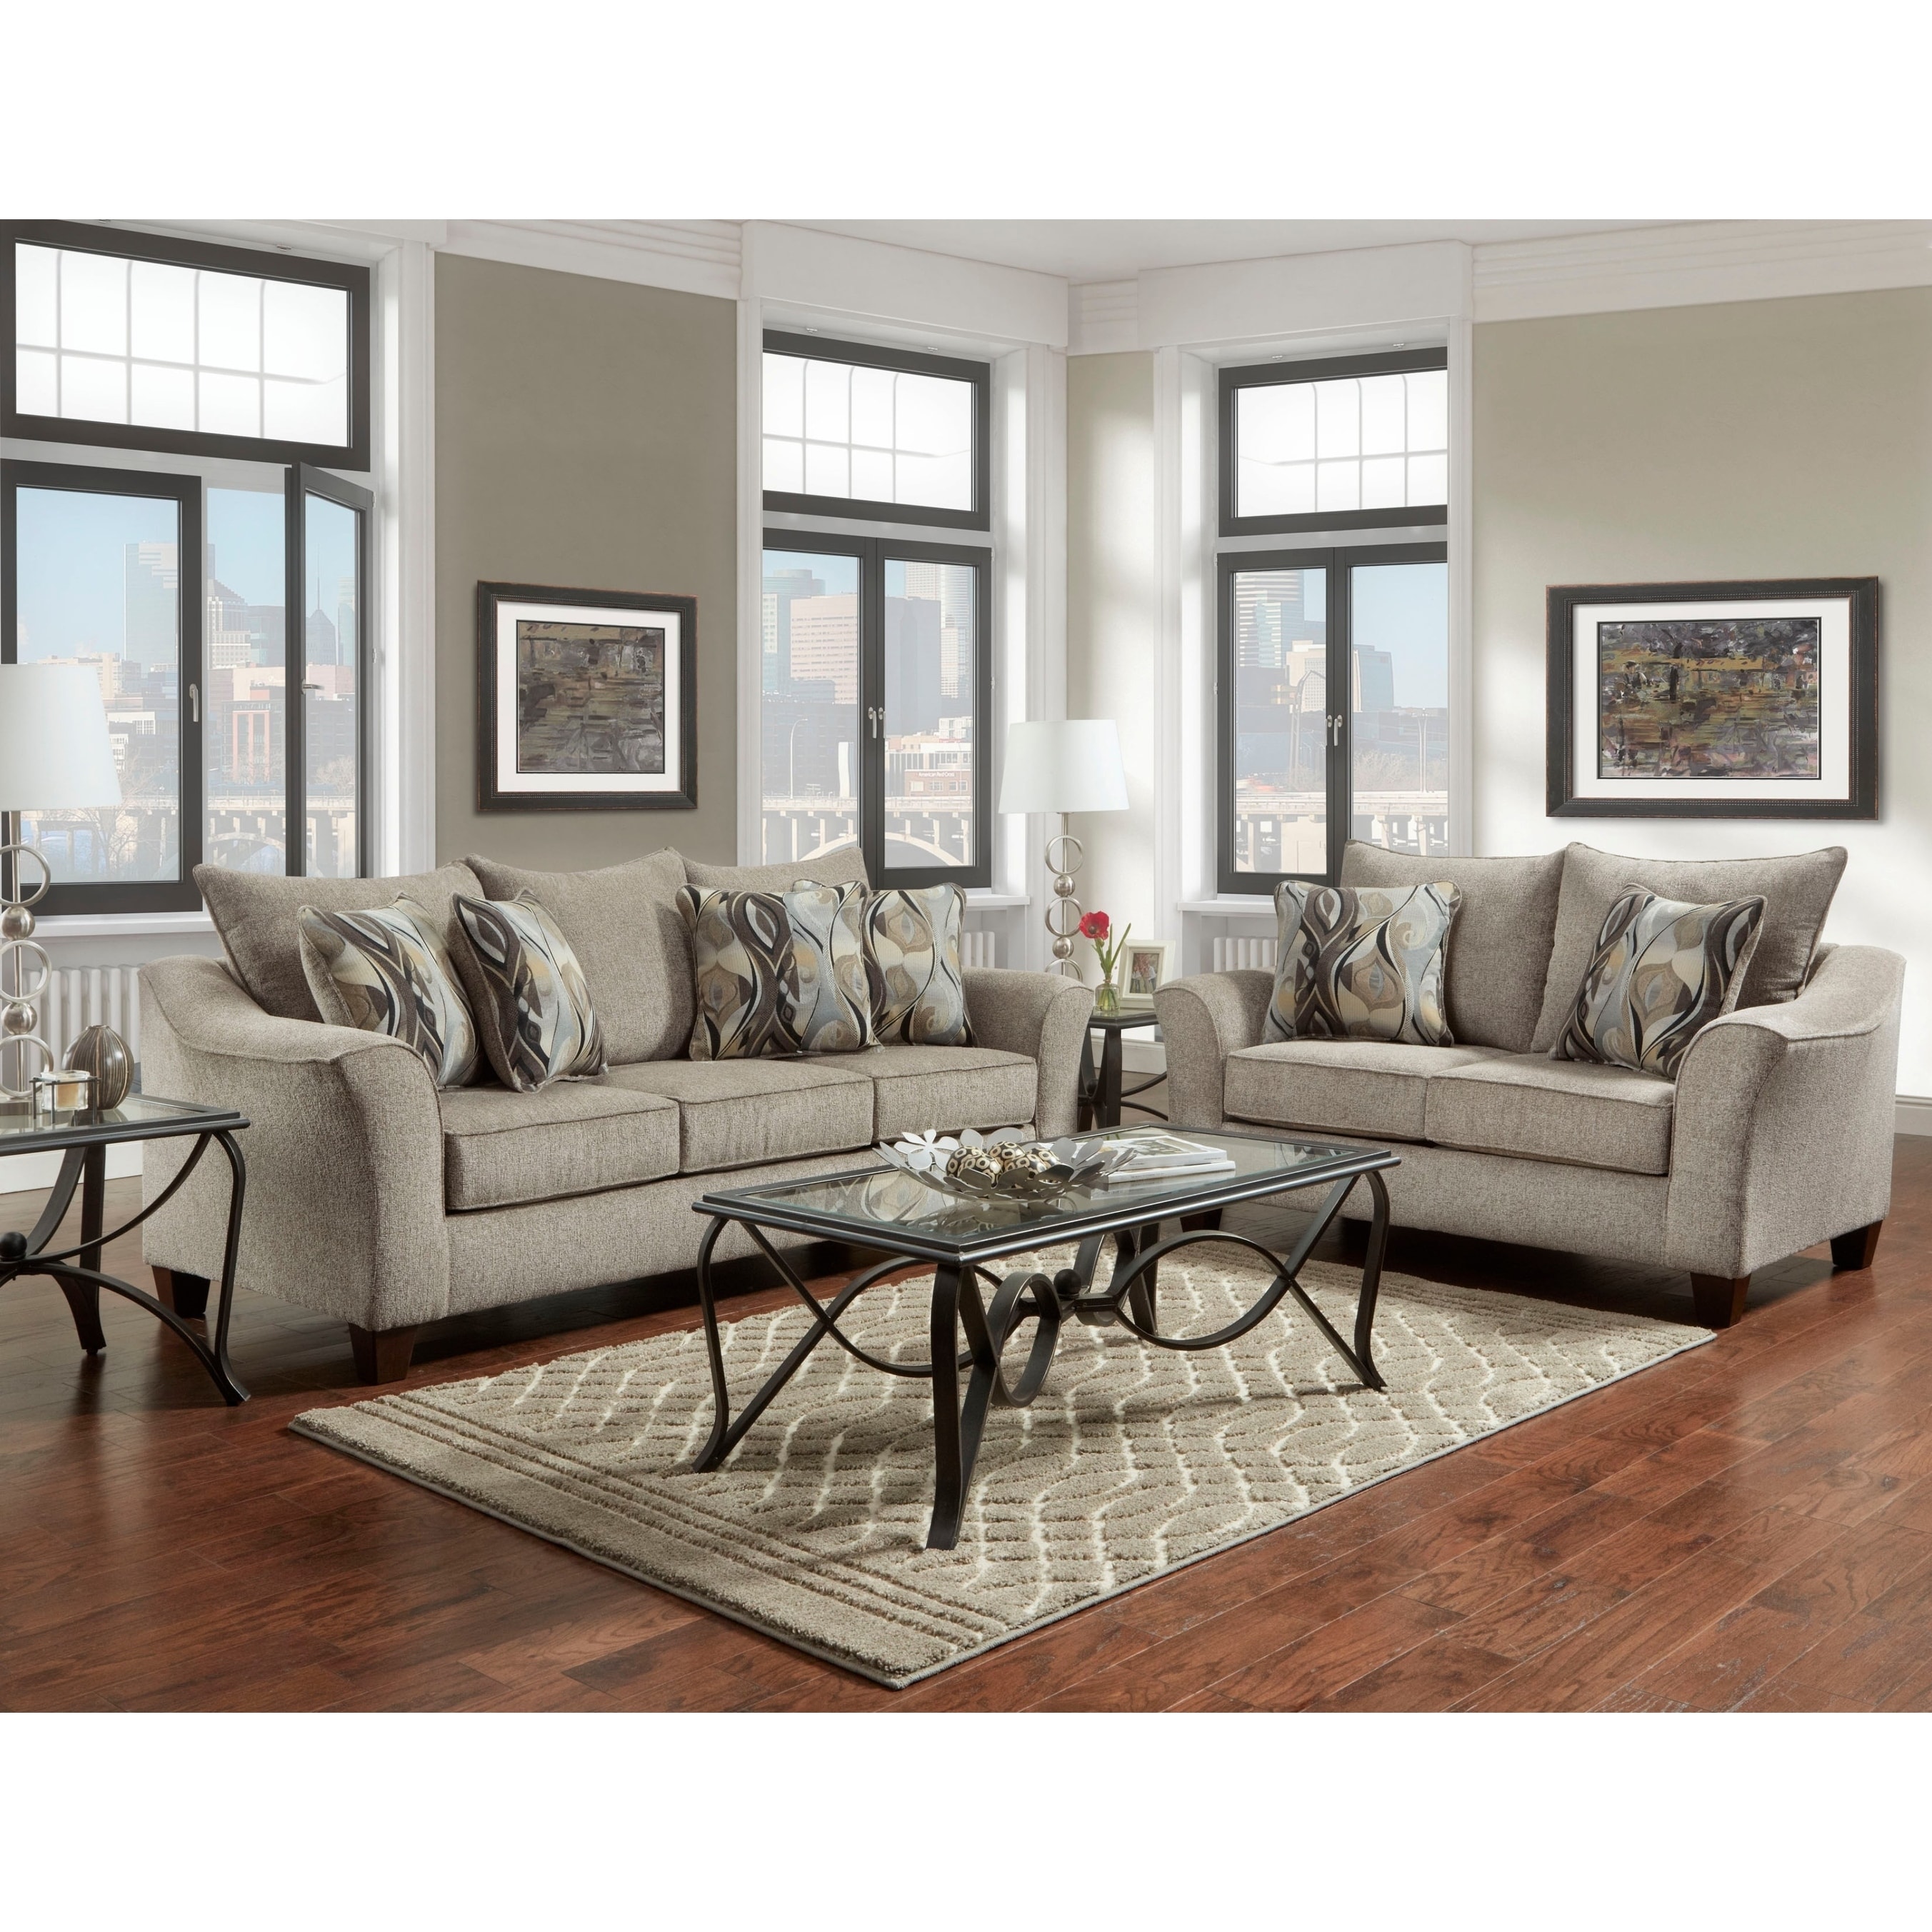 Roundhill Furniture Enda Pillow Back Fabric Sofa and Cuddler Chair Liv